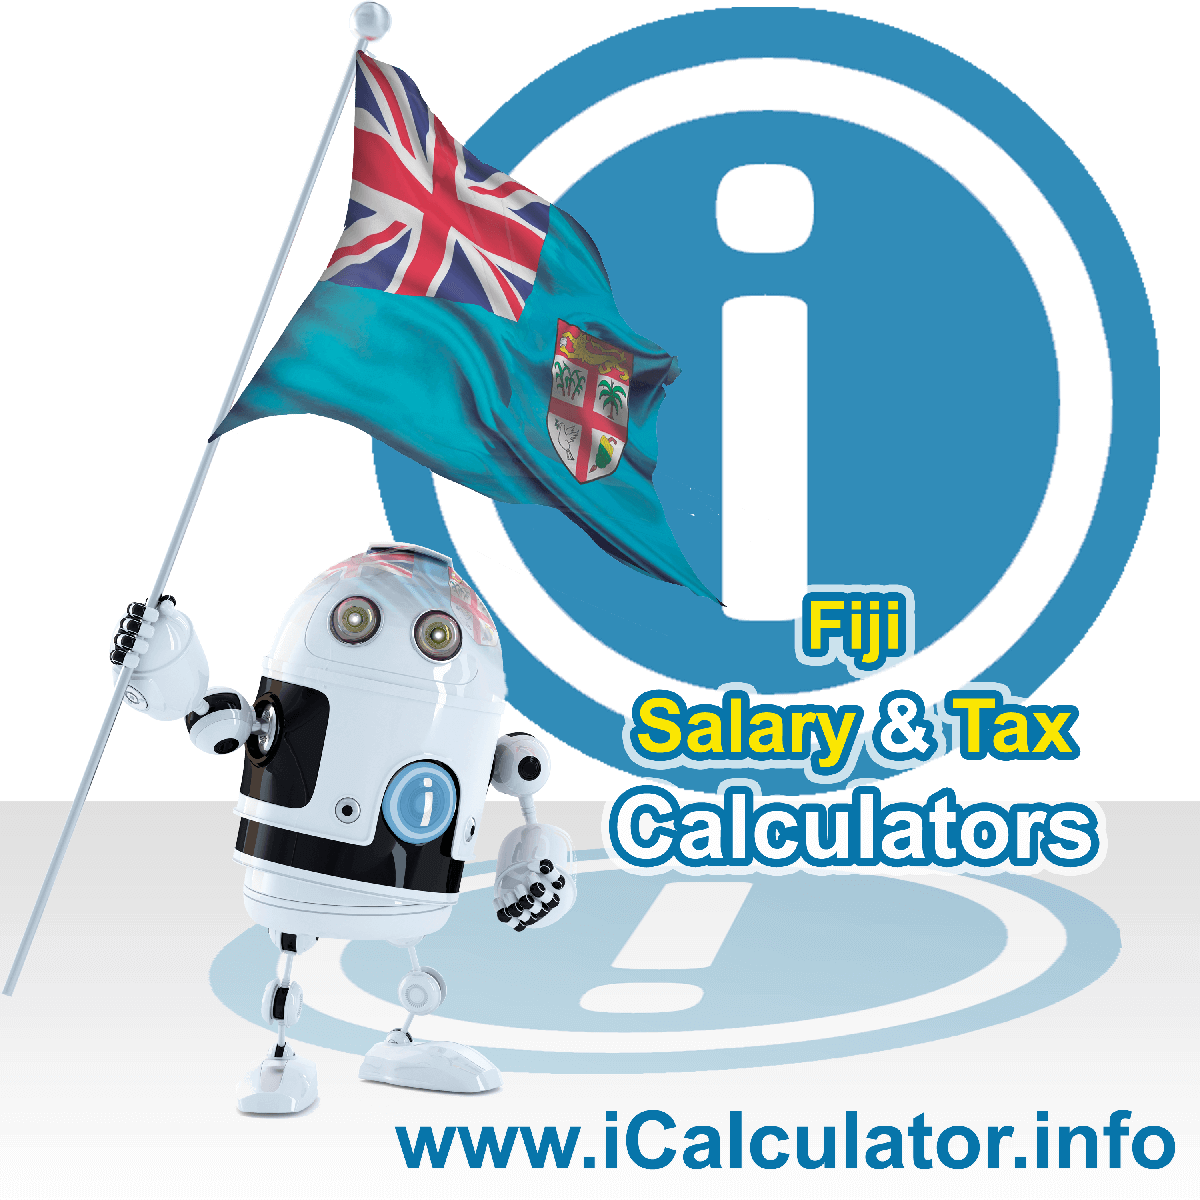 Fiji Wage Calculator. This image shows the Fiji flag and information relating to the tax formula for the Fiji Tax Calculator